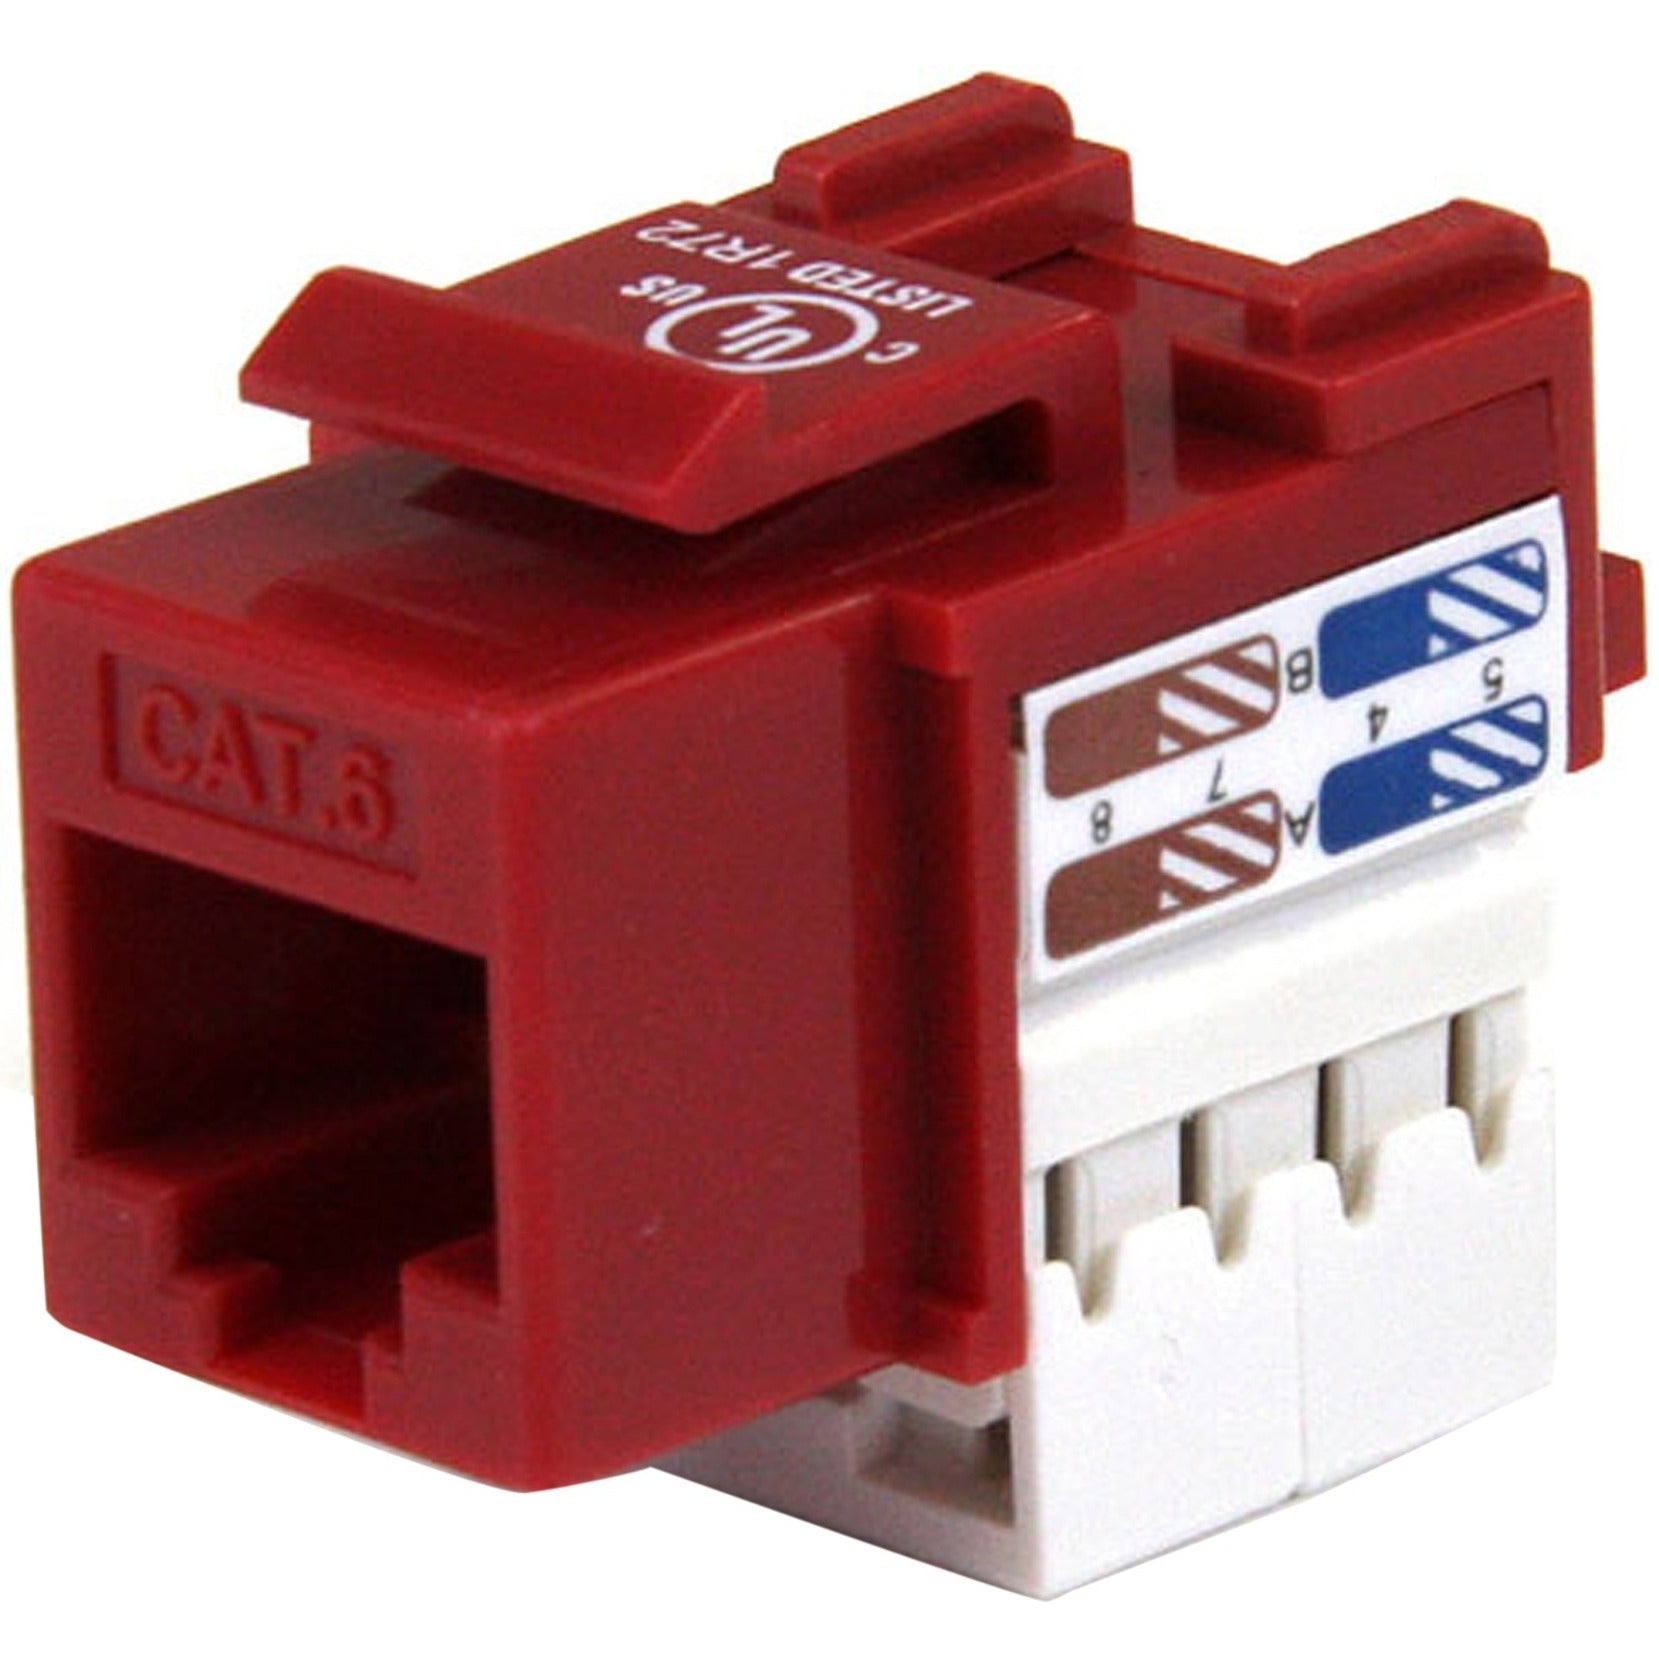 StarTech.com C6KEY110RD 110 Punch Type Category 6 Keystone Jack - Red, Network Connector